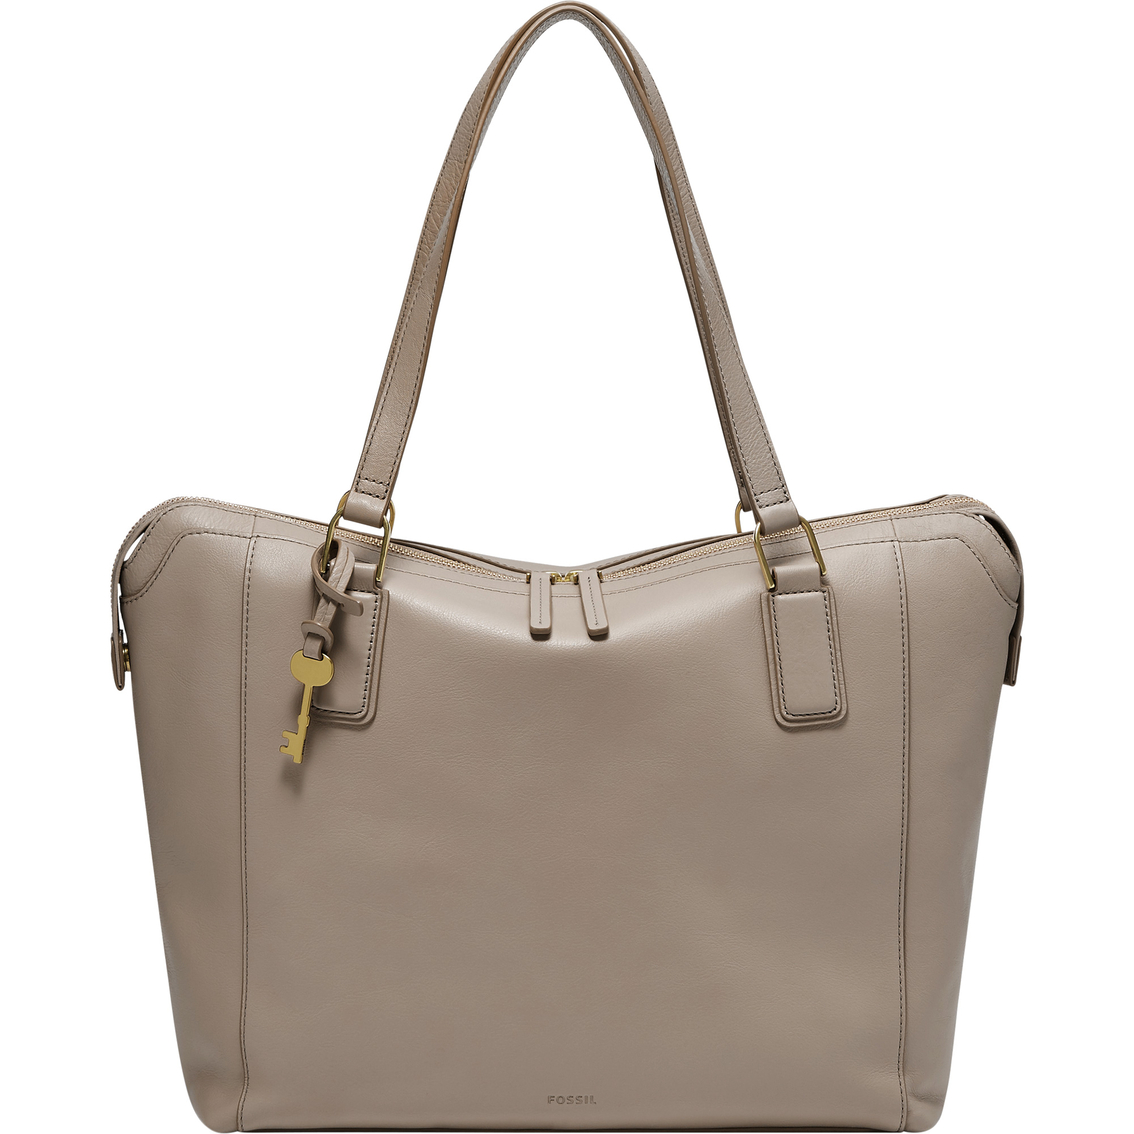 Fossil Jacqueline Leather Tote Bag | Totes & Shoppers | Clothing ...